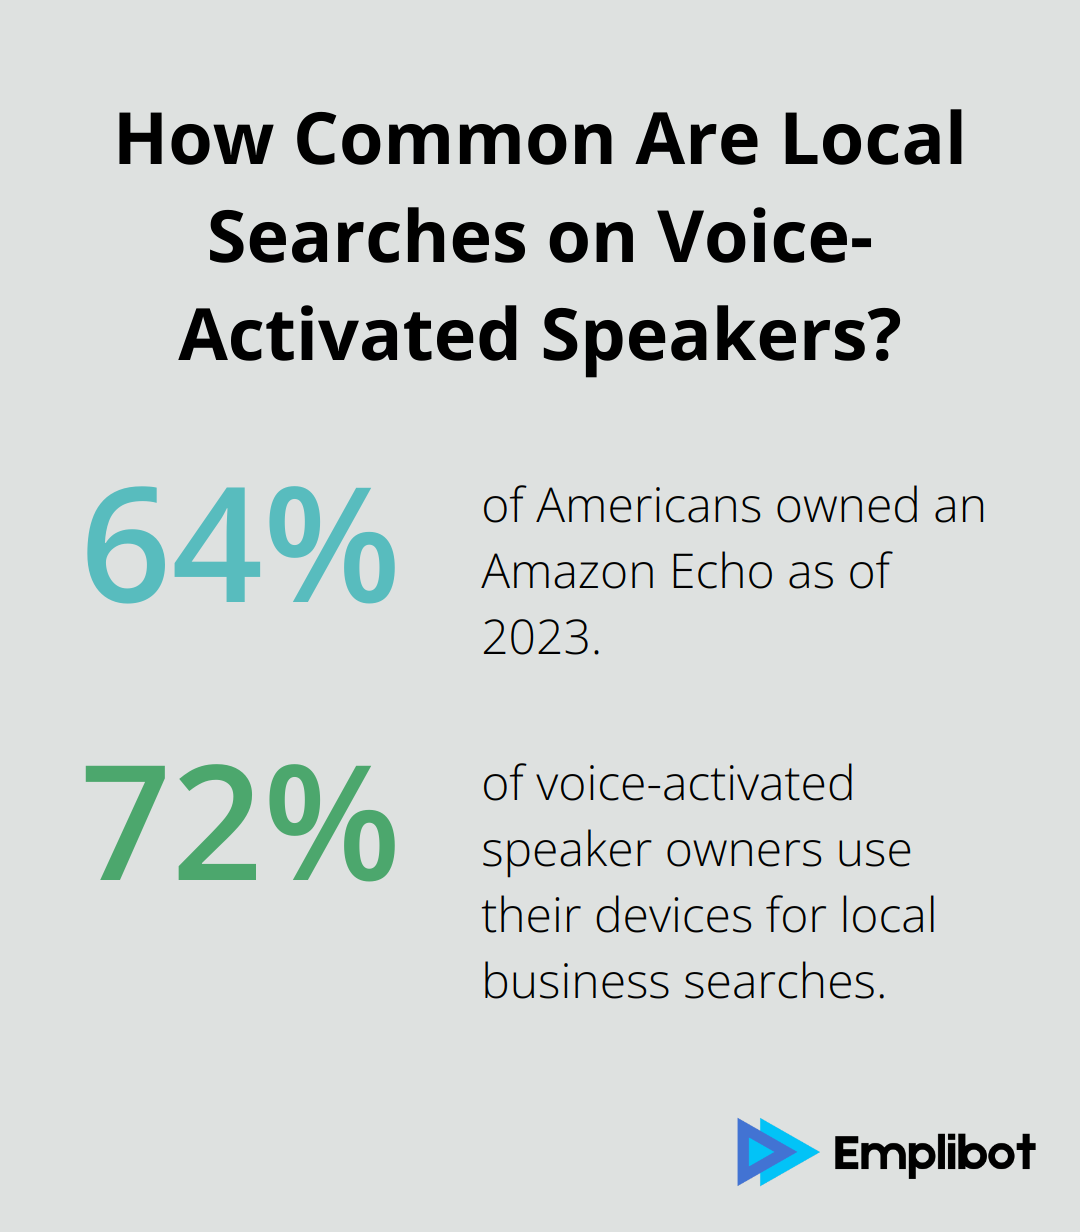 Fact - How Common Are Local Searches on Voice-Activated Speakers?